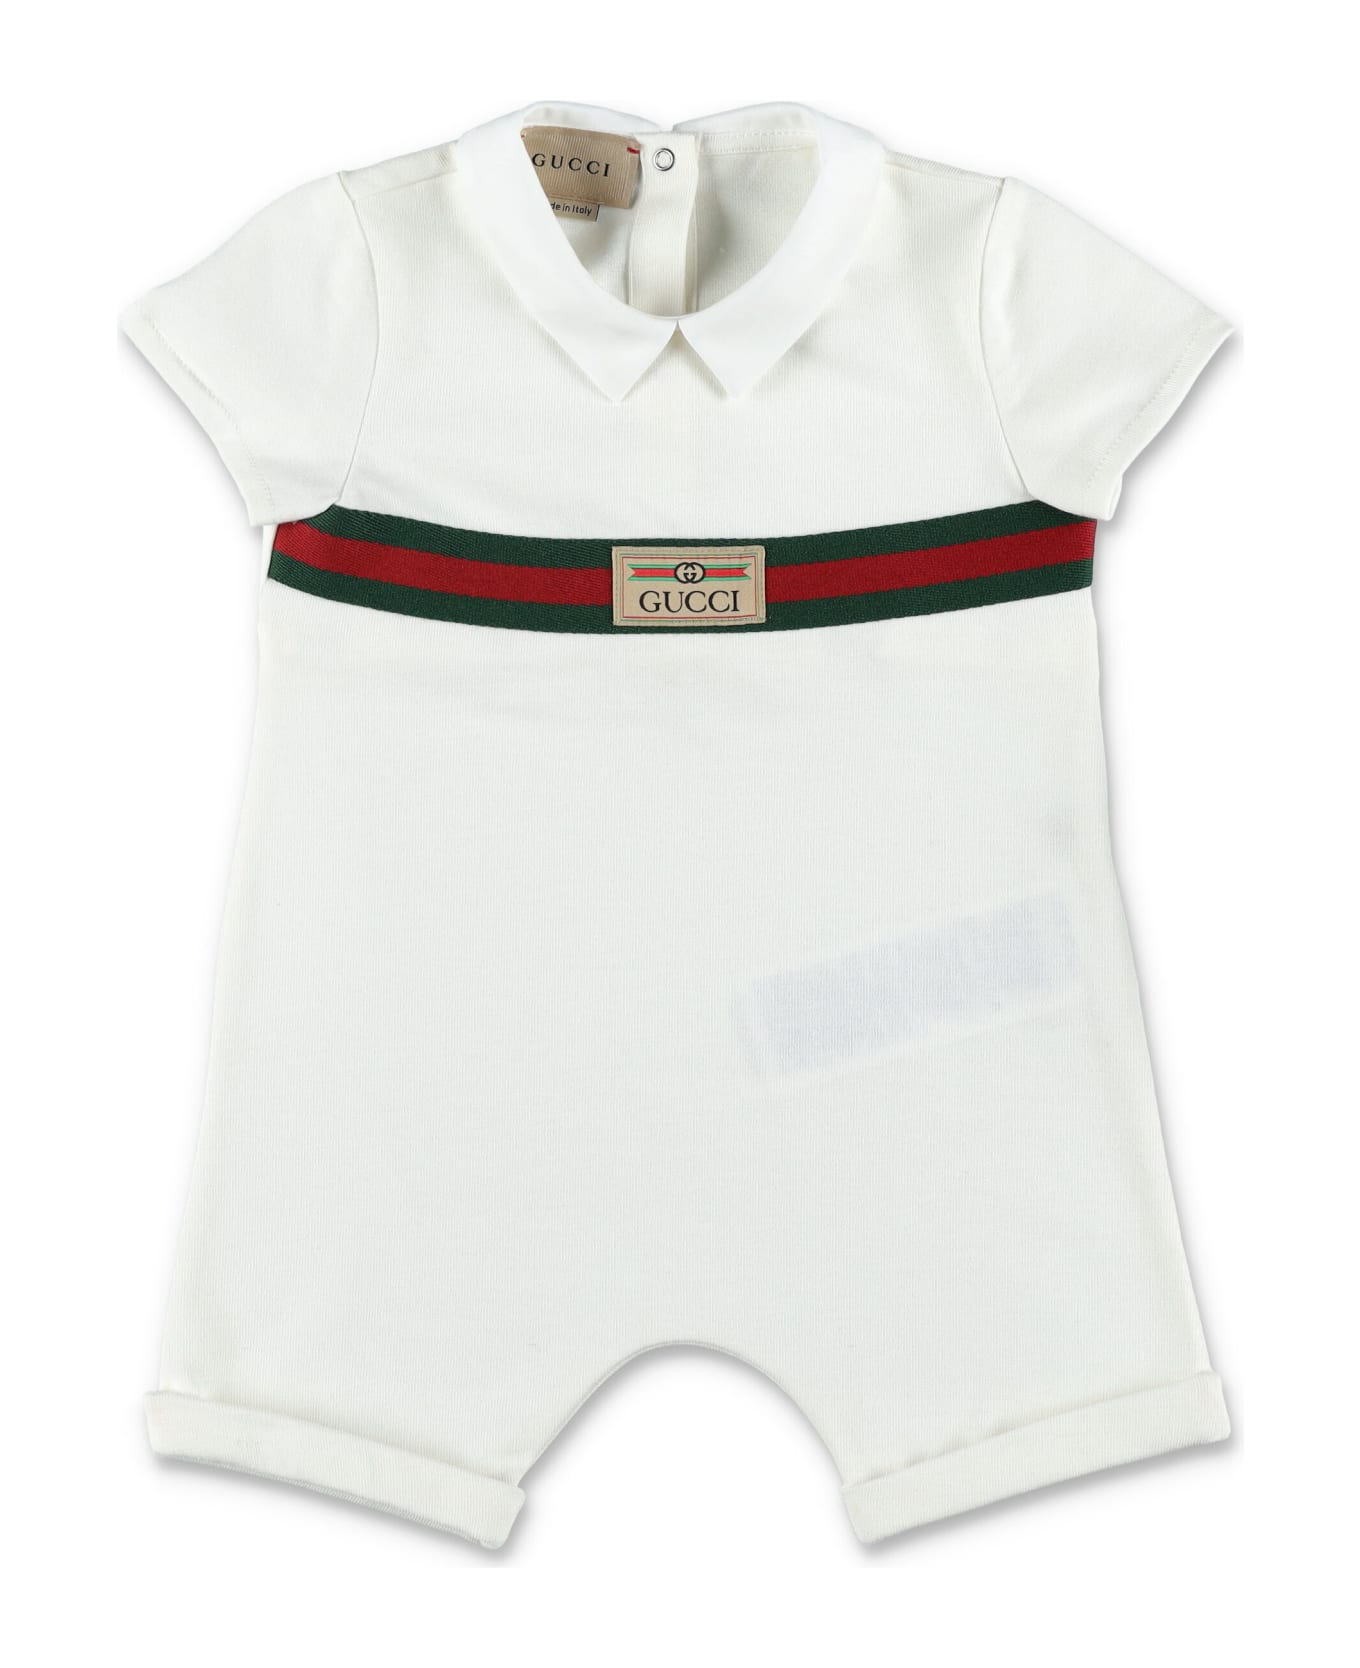 Gucci Body And Hat Set - WHITE ボディスーツ＆セットアップ